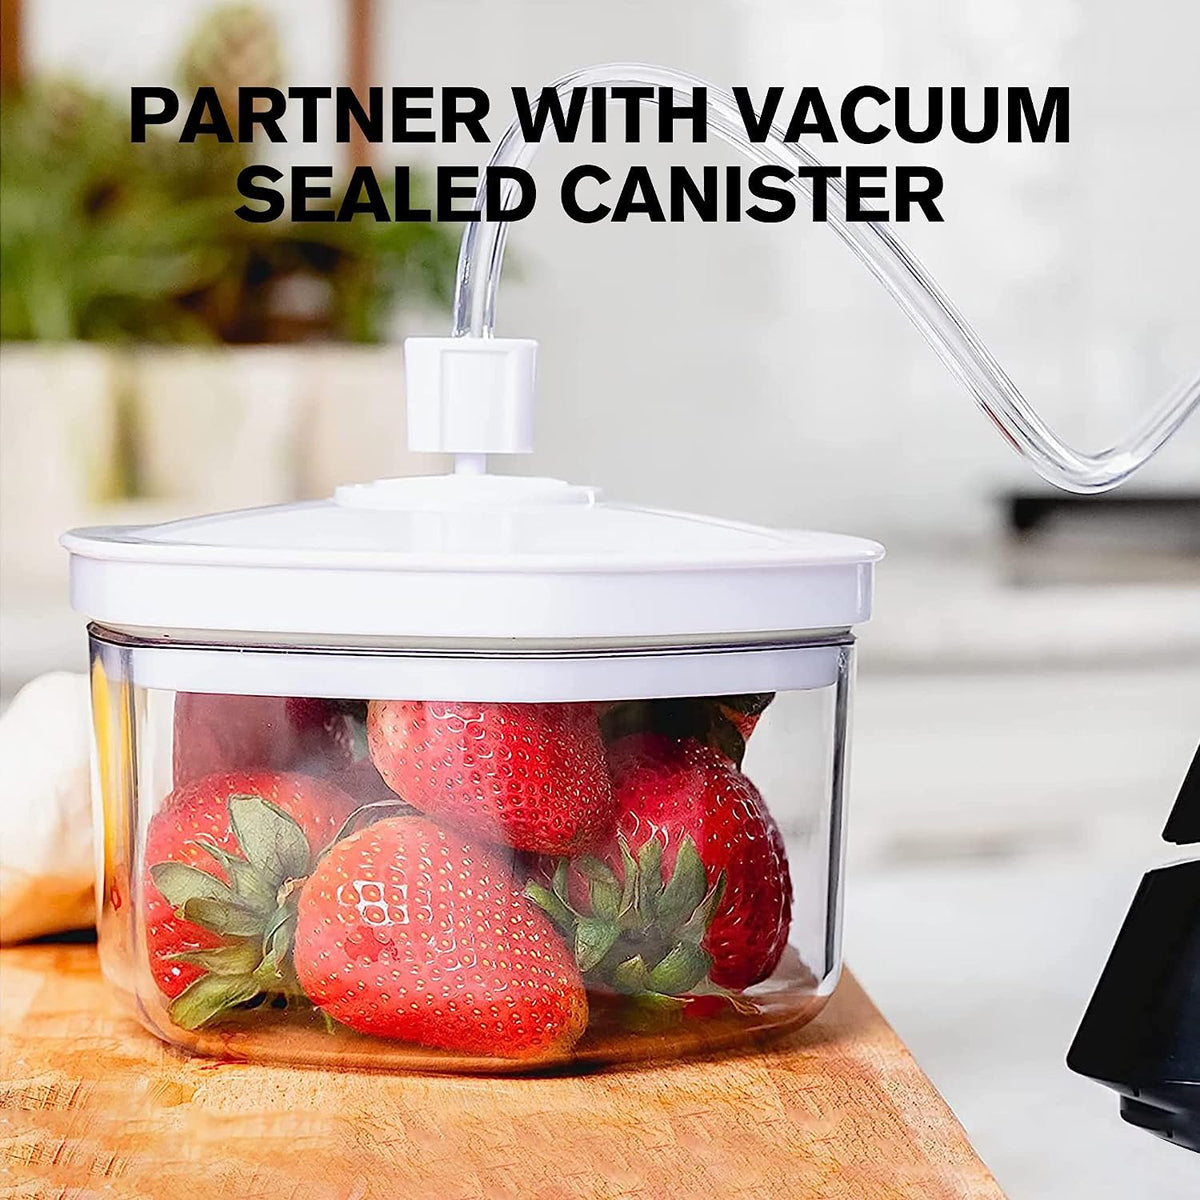 Partner With Vacuum Sealed Canister